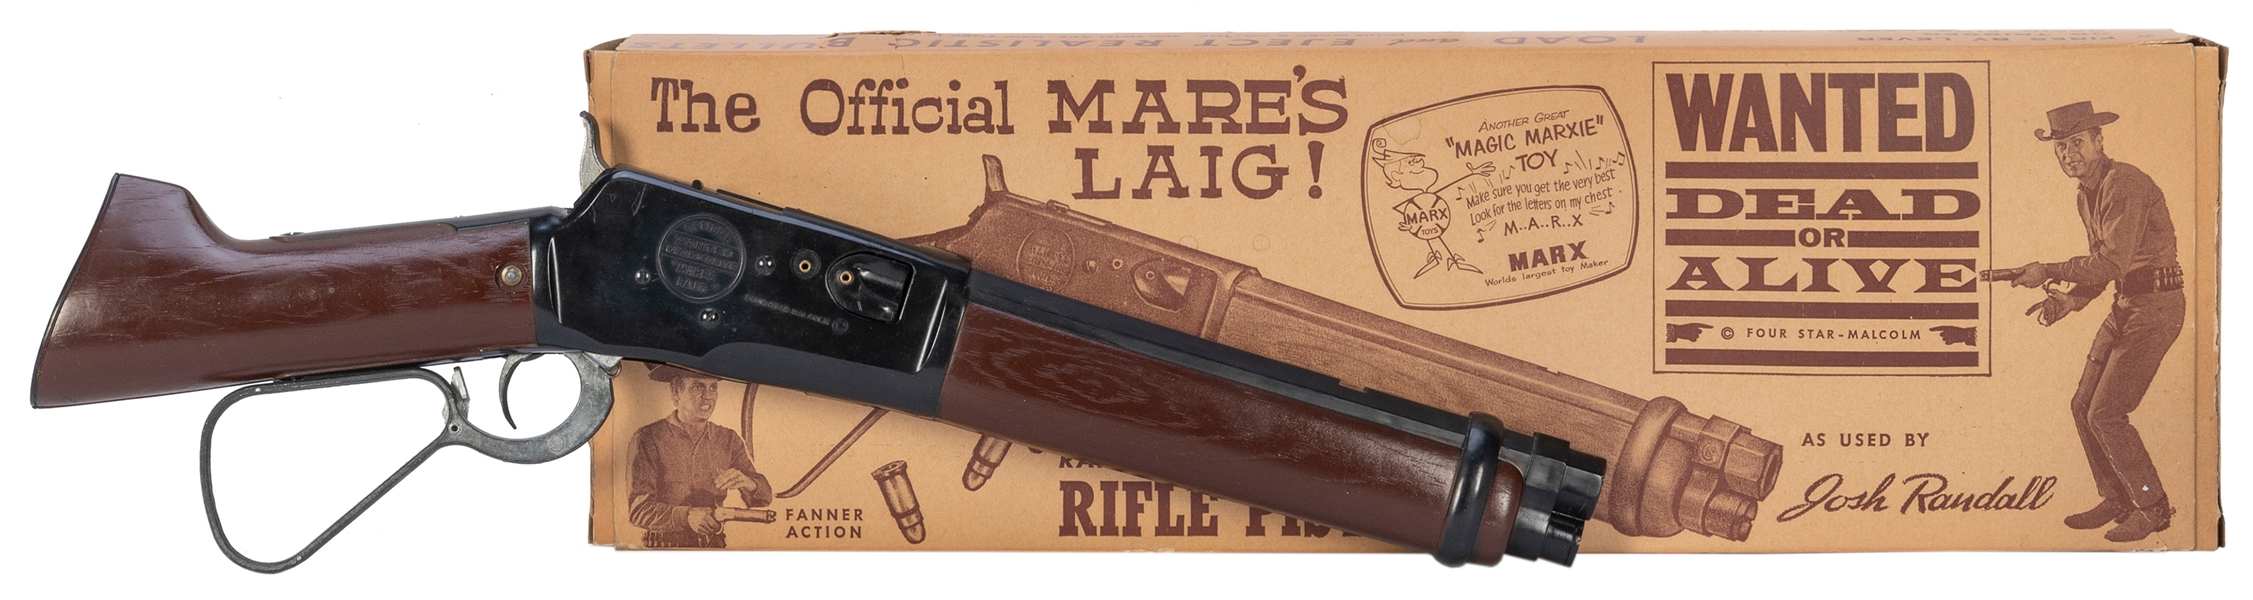  Marx “Wanted Dead or Alive” Mare’s Laig Rifle Pistol. New Y...